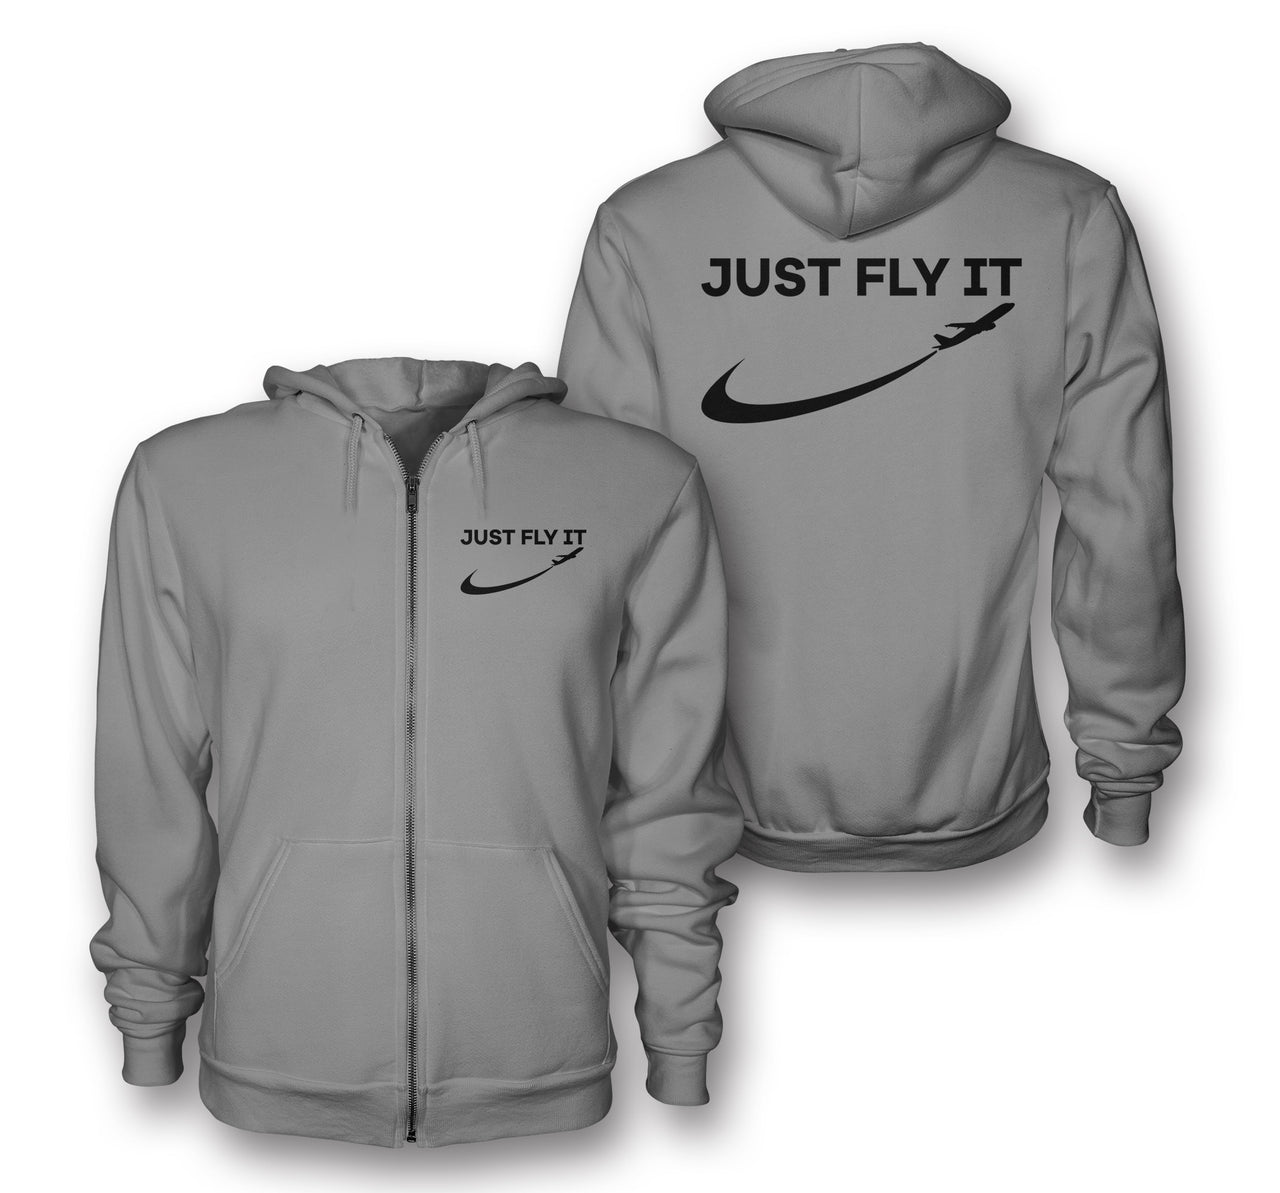 Just Fly It 2 Designed Zipped Hoodies